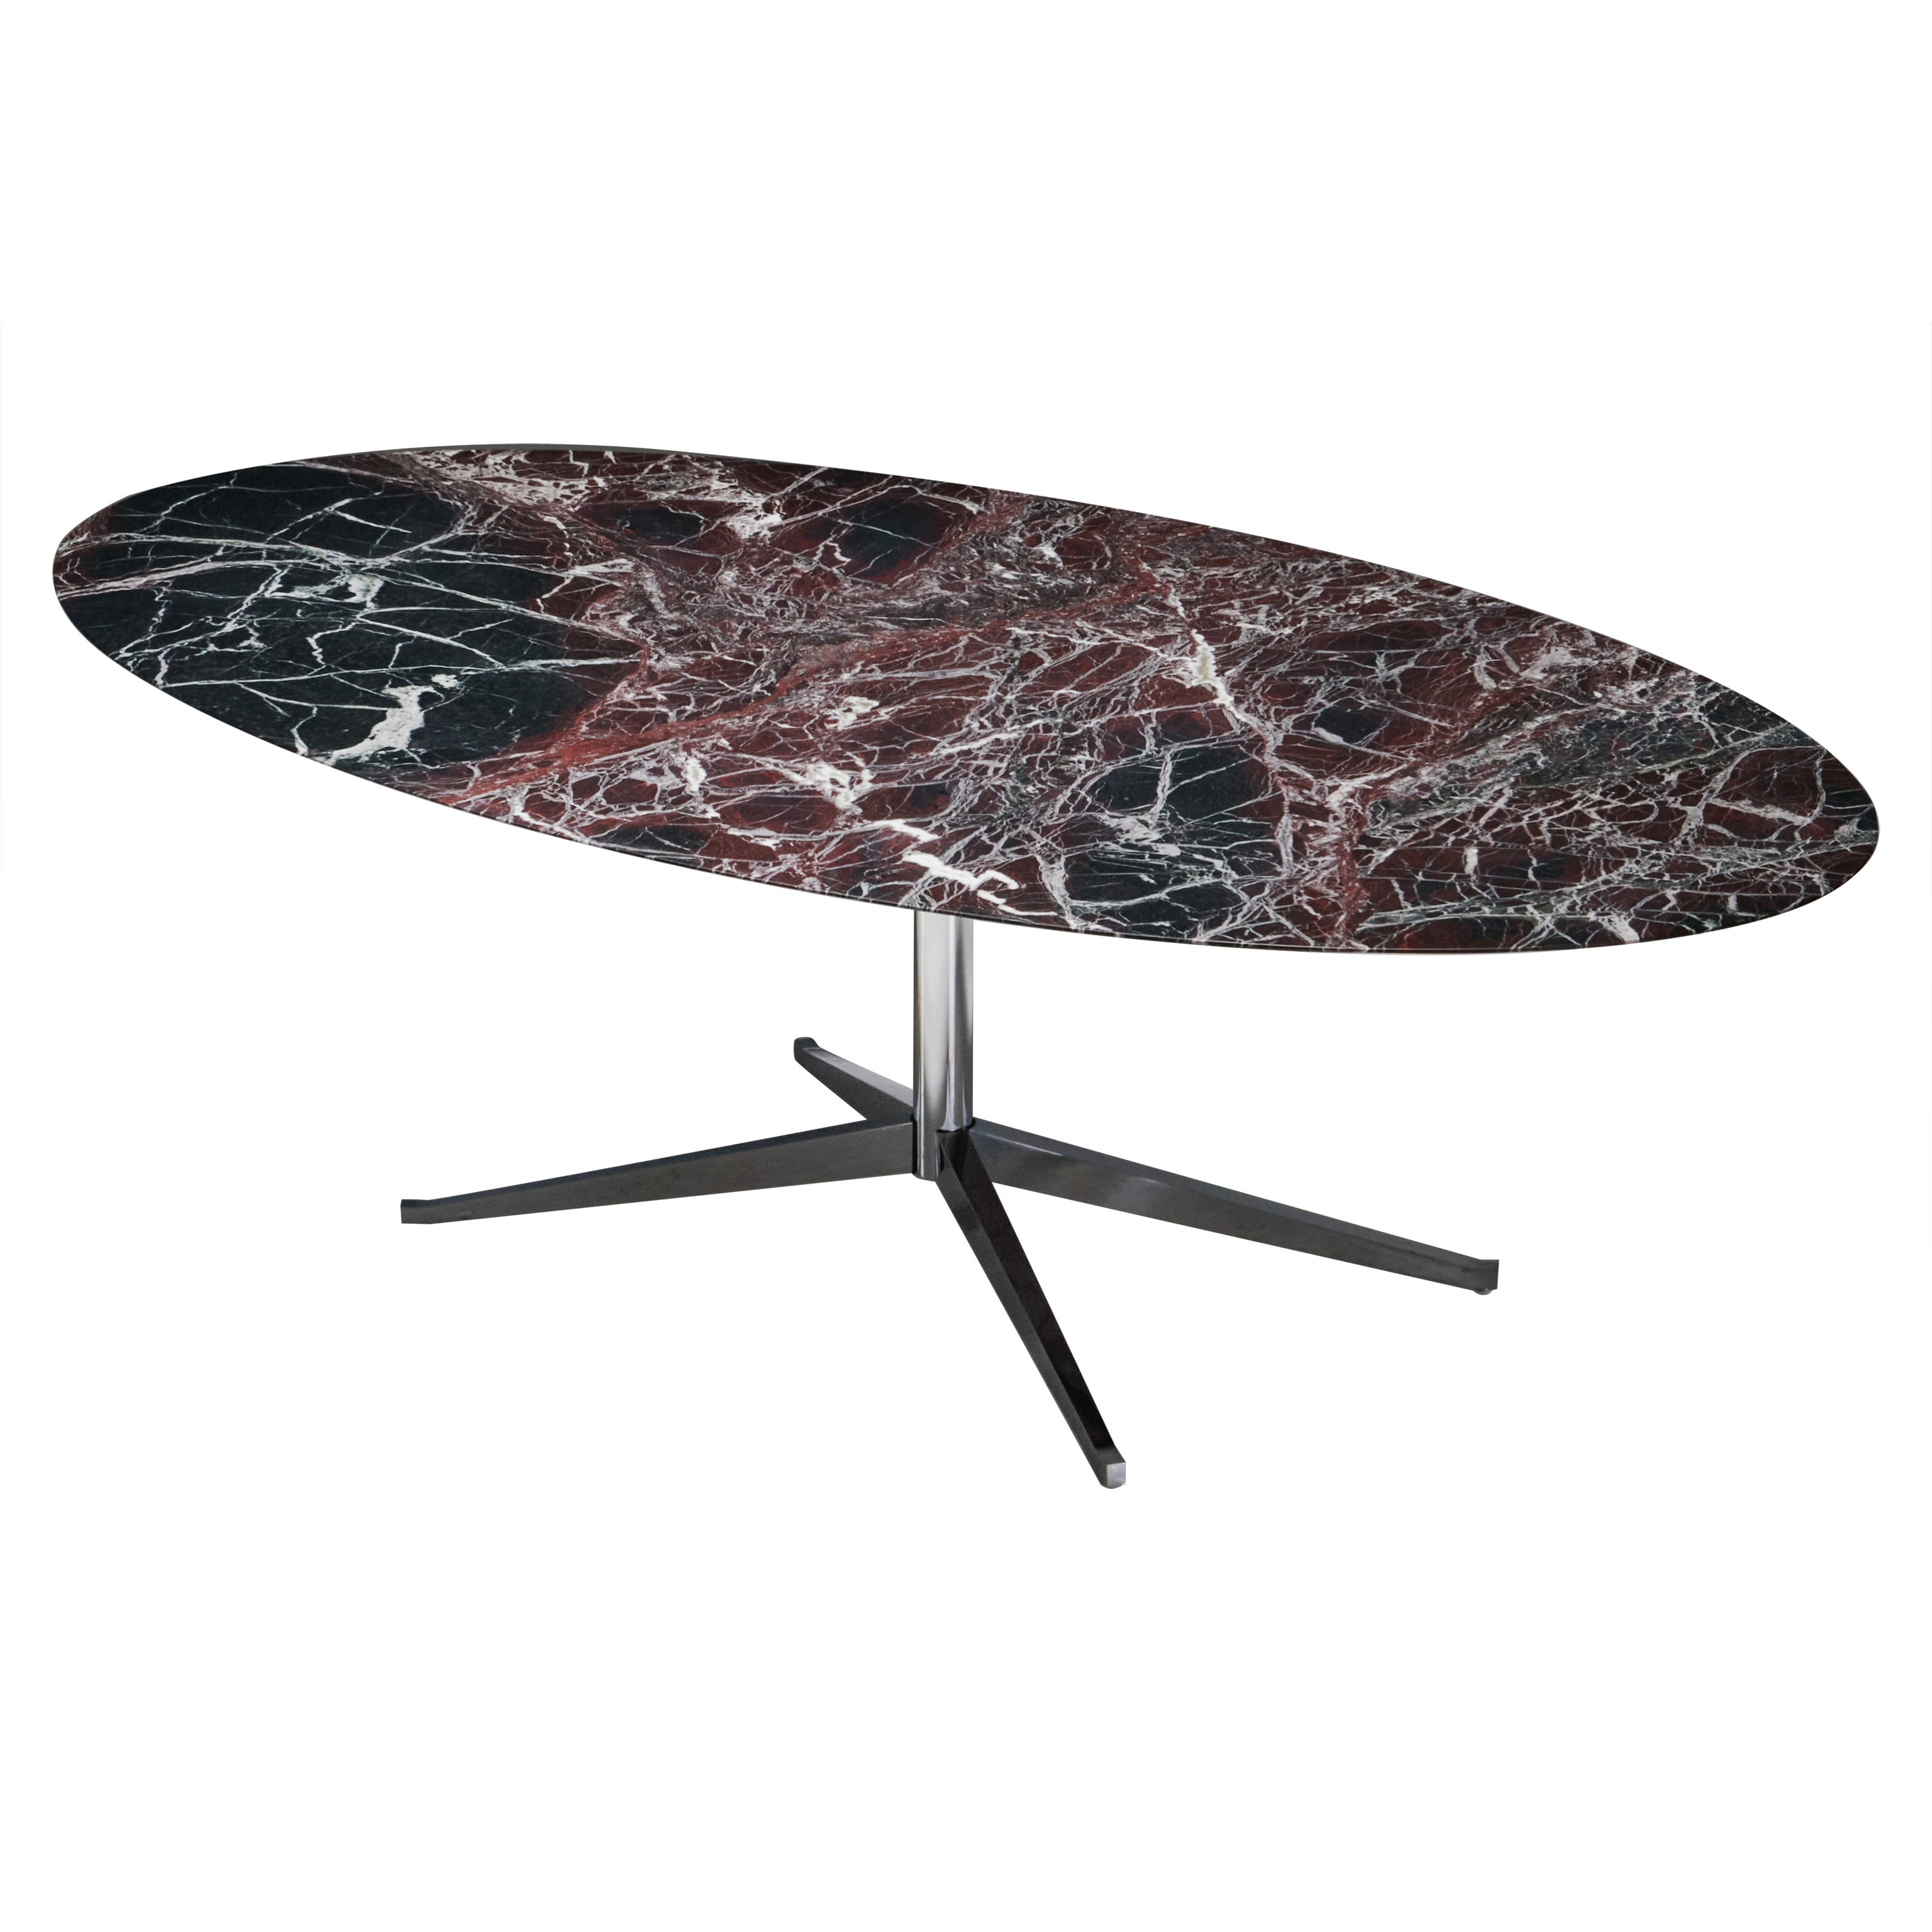 Oval Burgundy Marble Dining Table by Florence Knoll, United States, 1960s